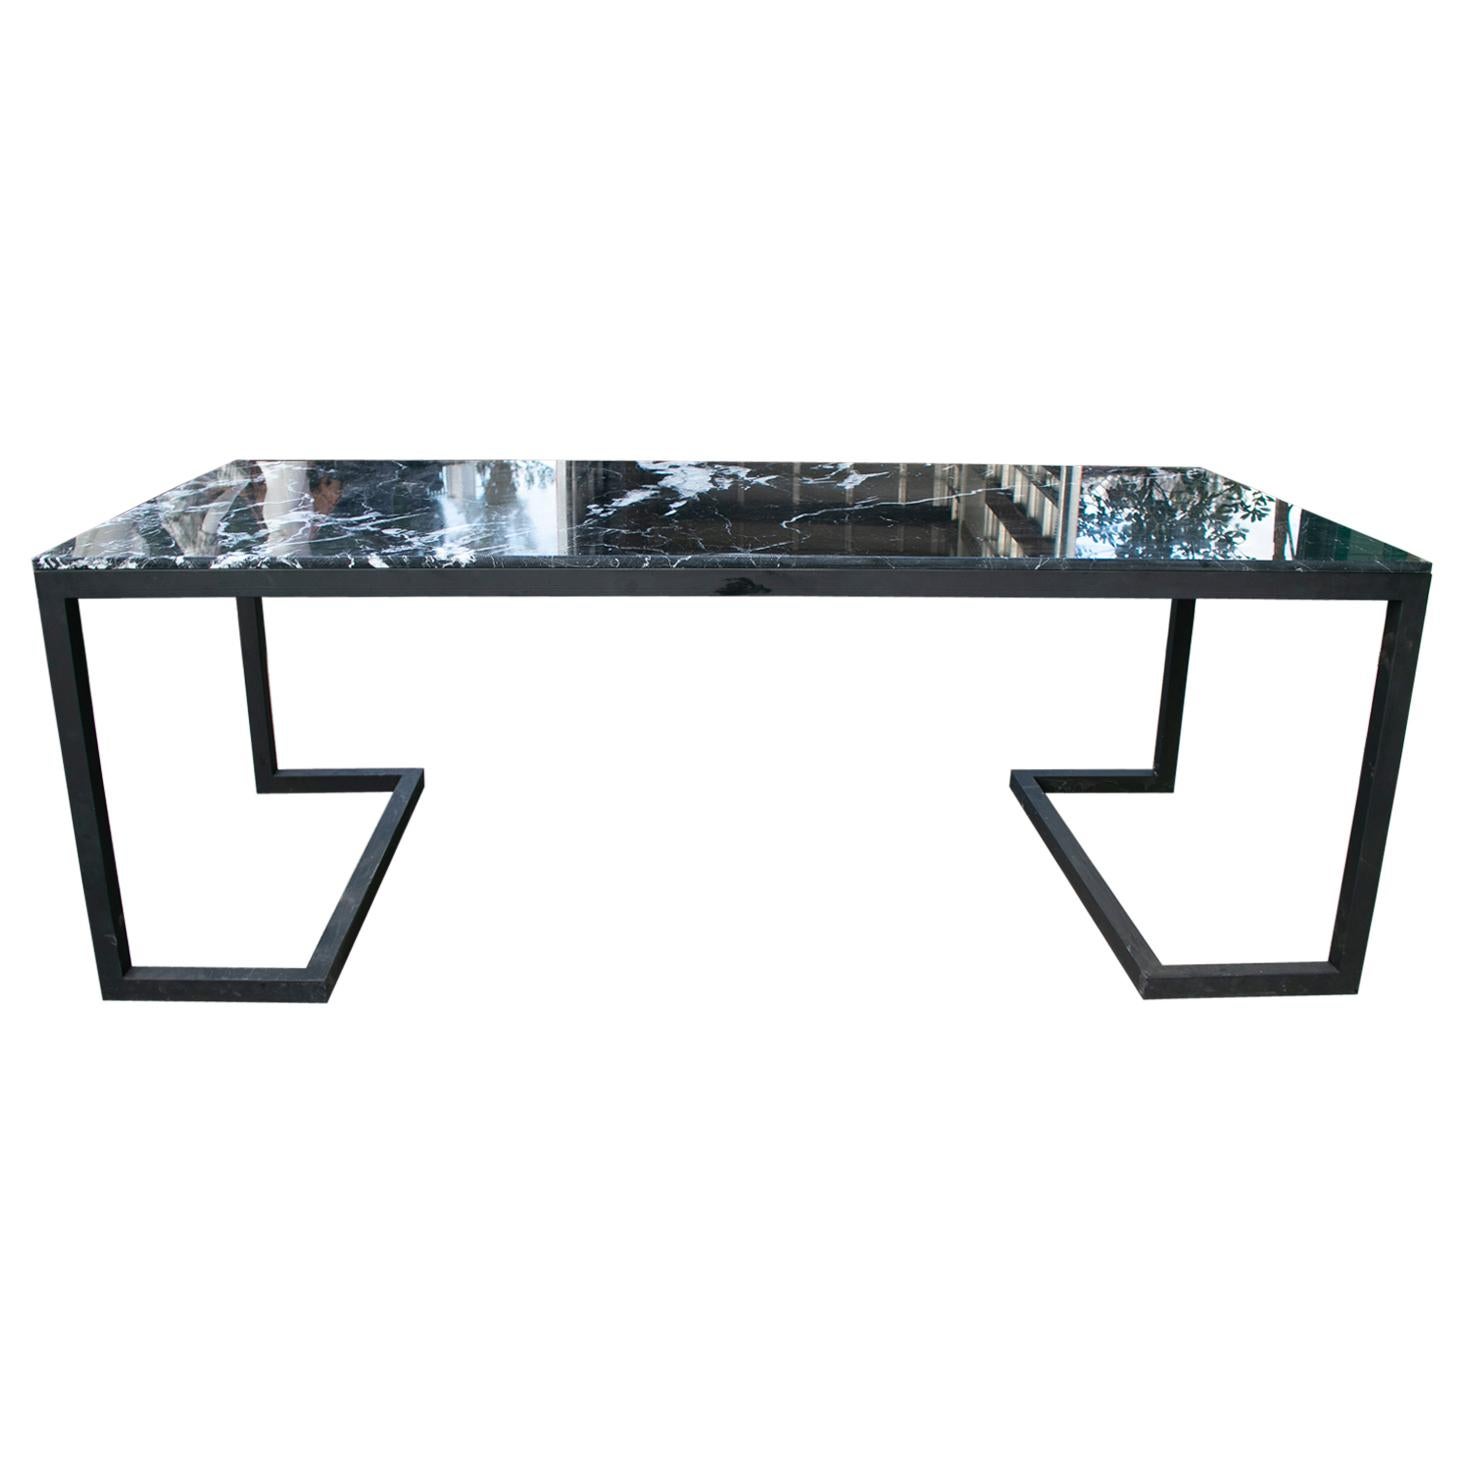 2000s Spanish Iron Table with Marquina Black Marble Top